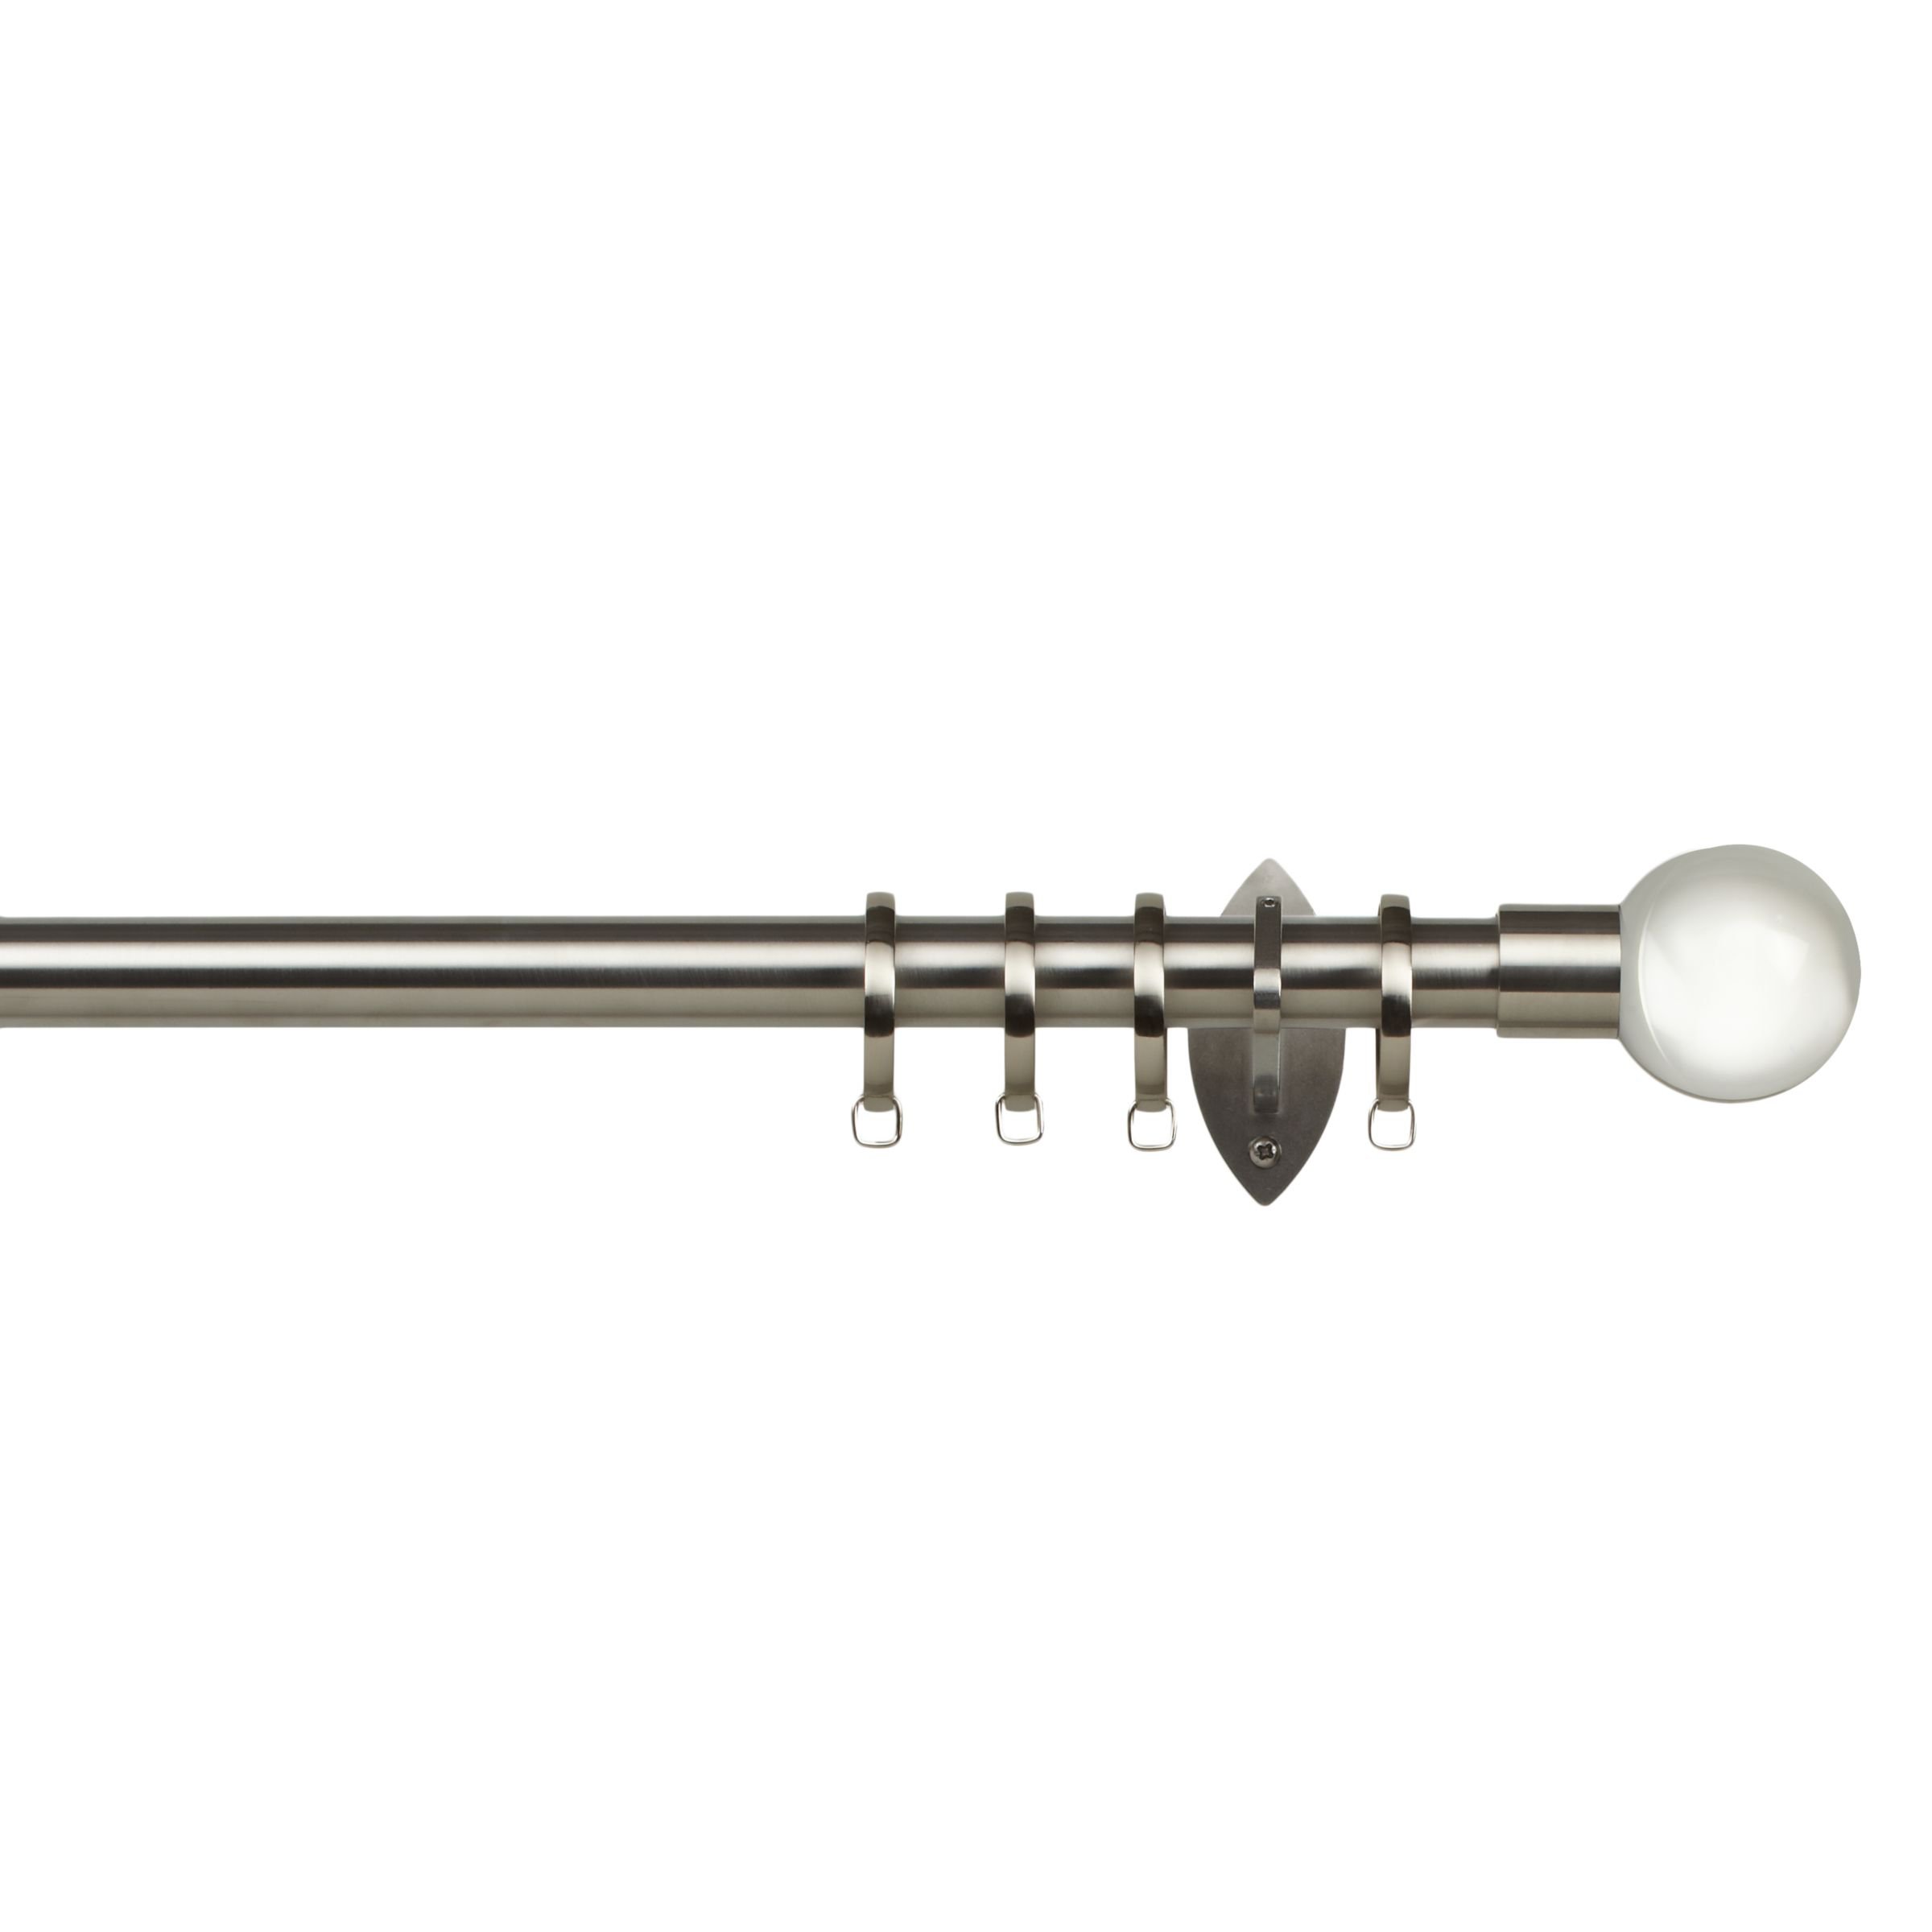 John Lewis & Partners Made to Measure Contemporary Straight Curtain Pole, Crystal Ball Finial